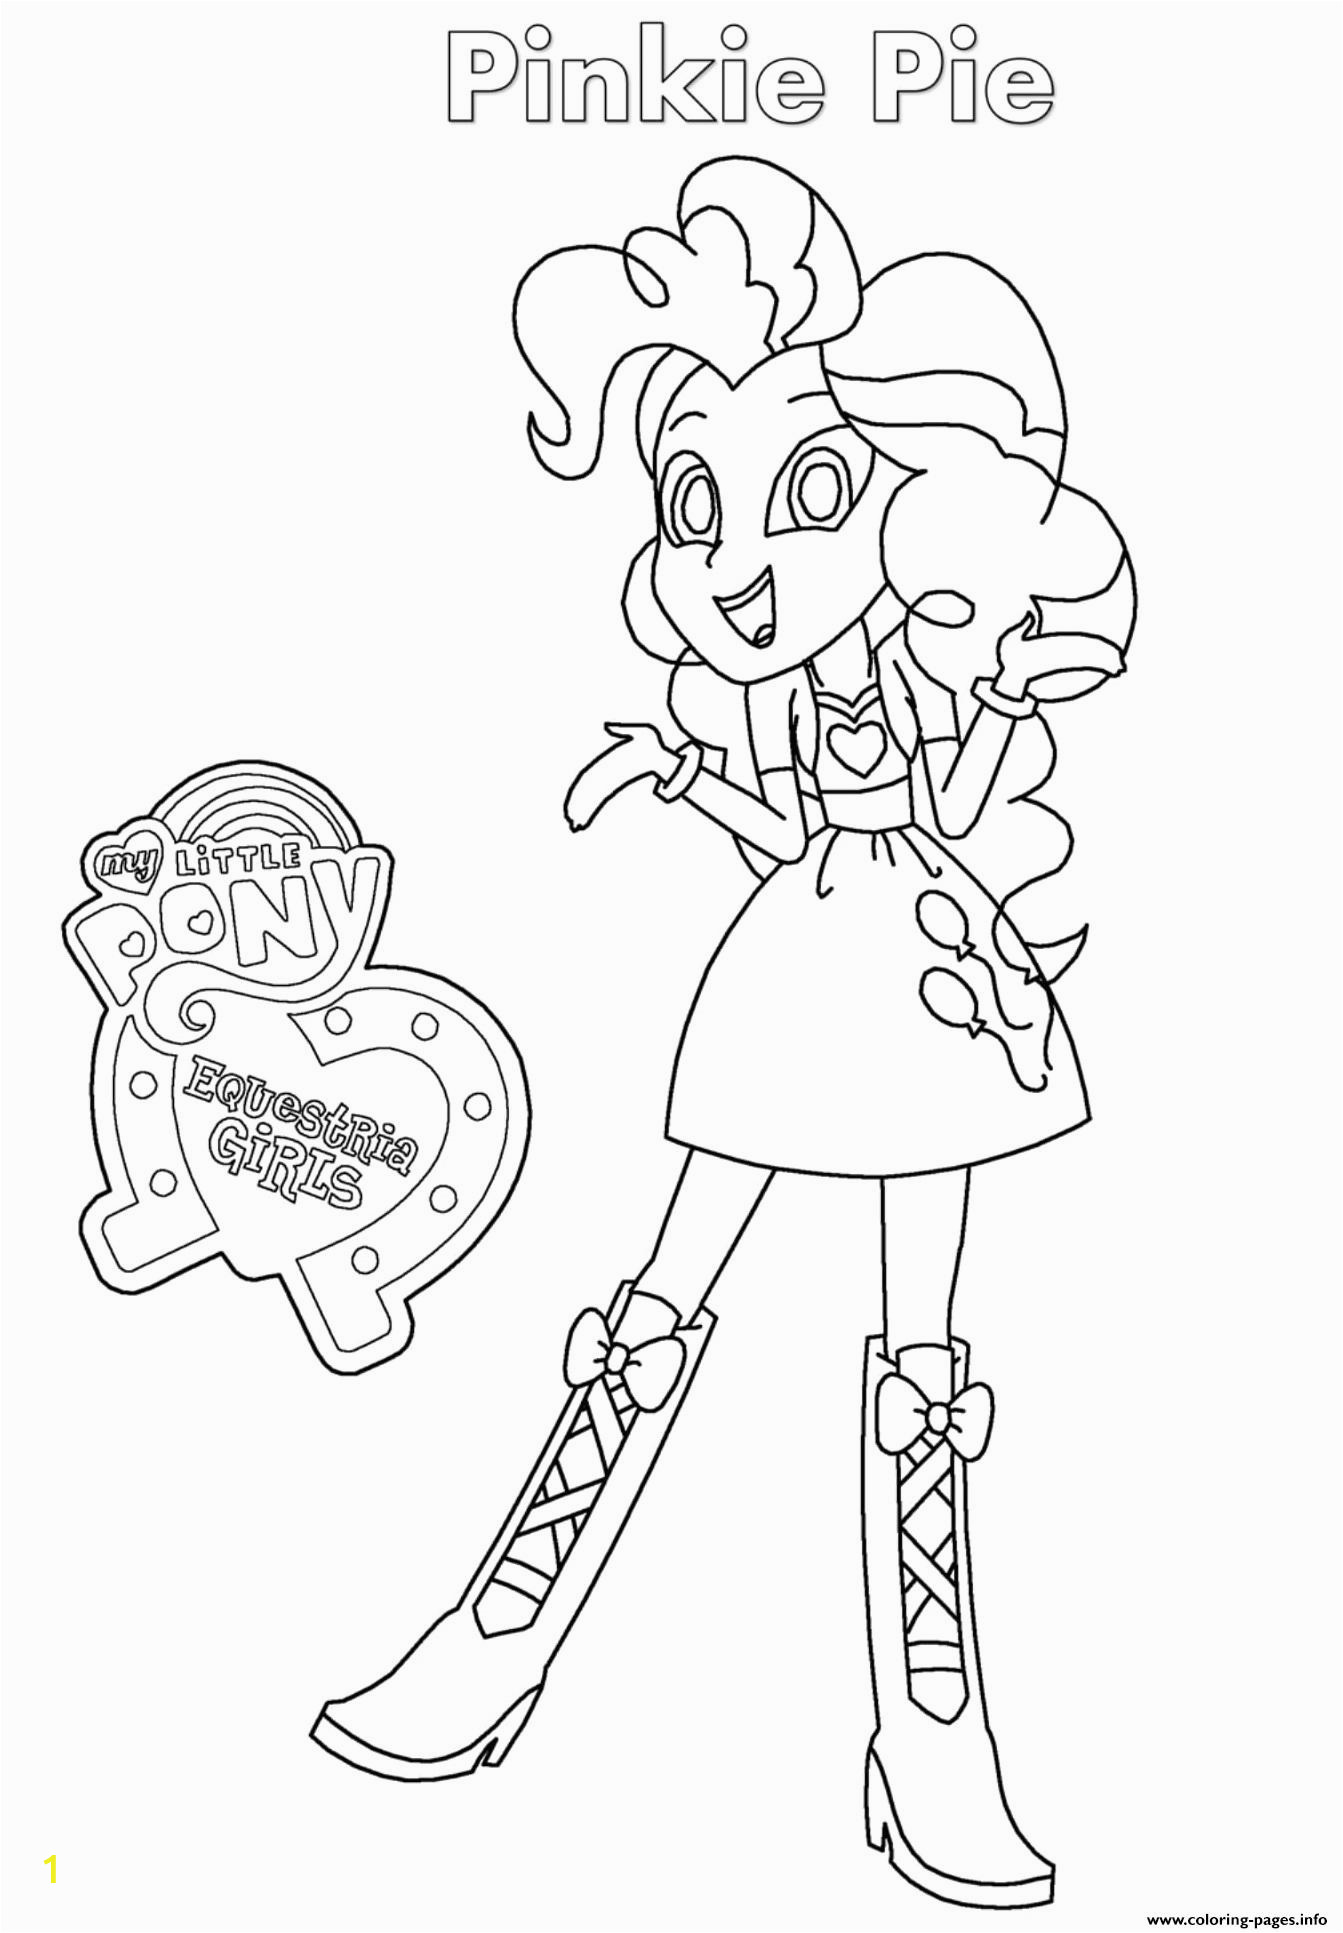 equestria girls pinkie pie printable coloring pages book